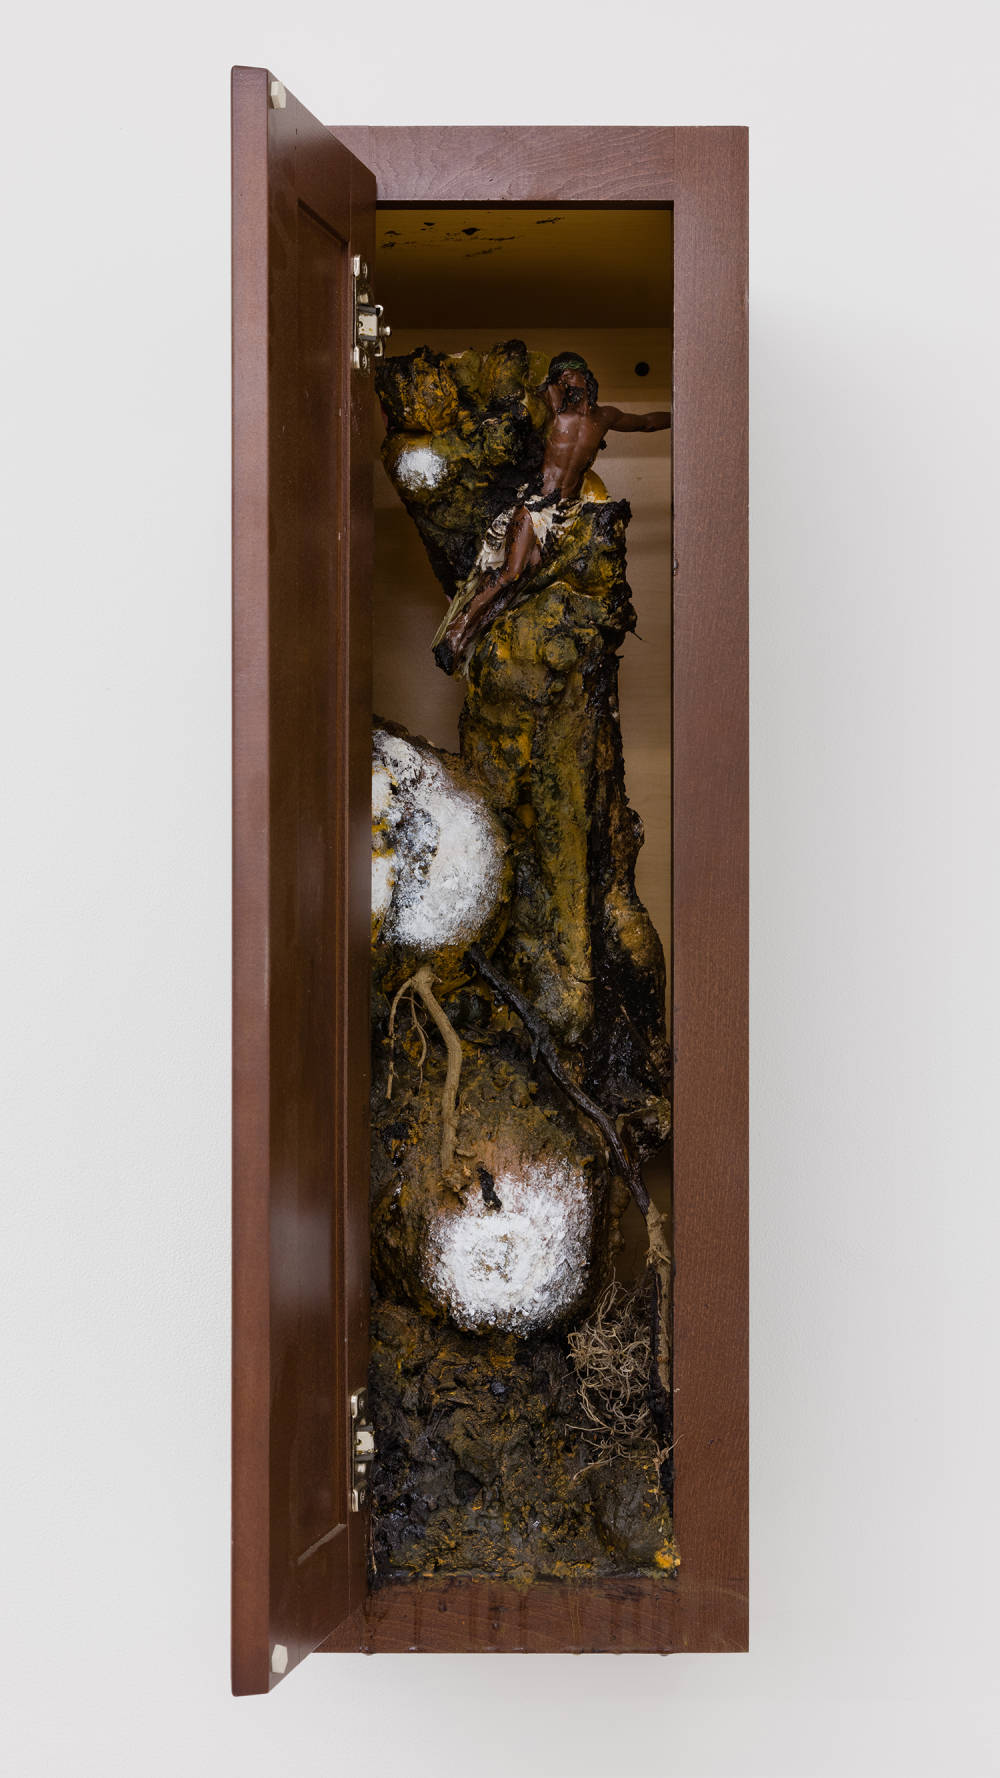 Image of a sculpture by Brandon Ndife. Hanging on a gallery wall is what appears to be a piece of furniture, like a kitchen cabinet, painted brown with dirt, debris and contained growth on the inside of the furniture. What looks to be gourds are "growing" on a central trunk inside of the artwork, painted white like mold. There is a small figurine of a black Jesus in the cabinet.